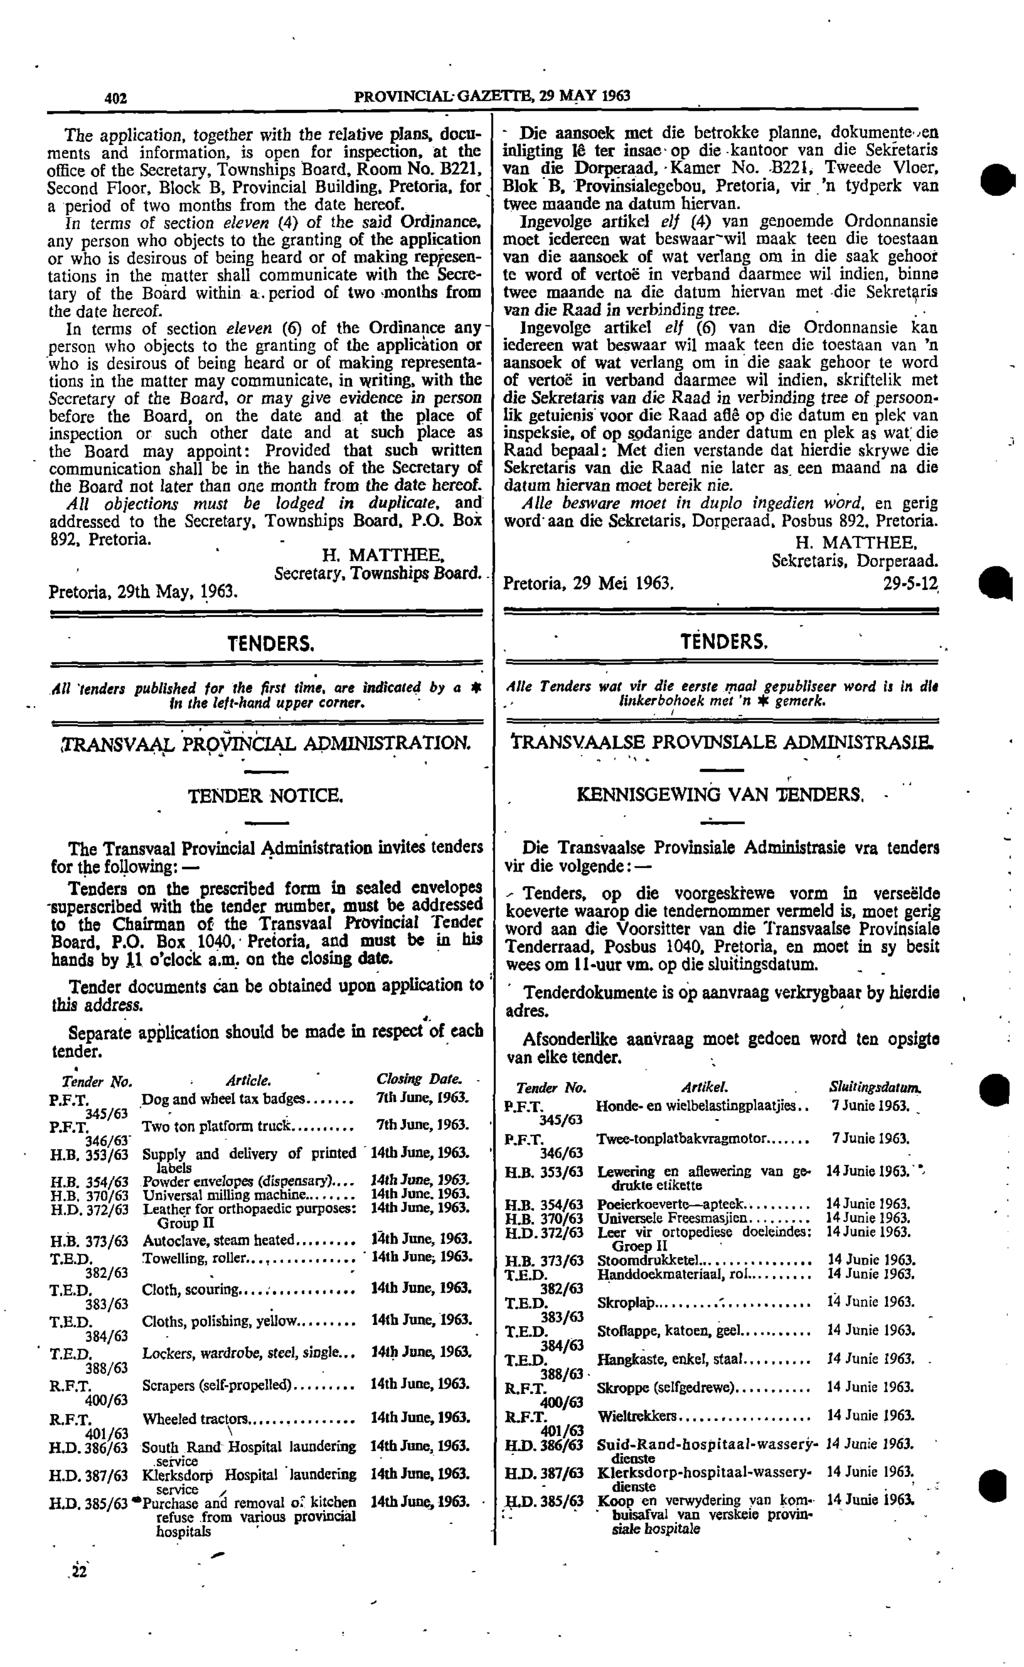 402 PROVNCAL GAZETTE 29 MAY 1963 The application together with the relative plans docu Die aansoek met die betrokke plane dokumenteen ments and information is open for inspection at the kitting 16